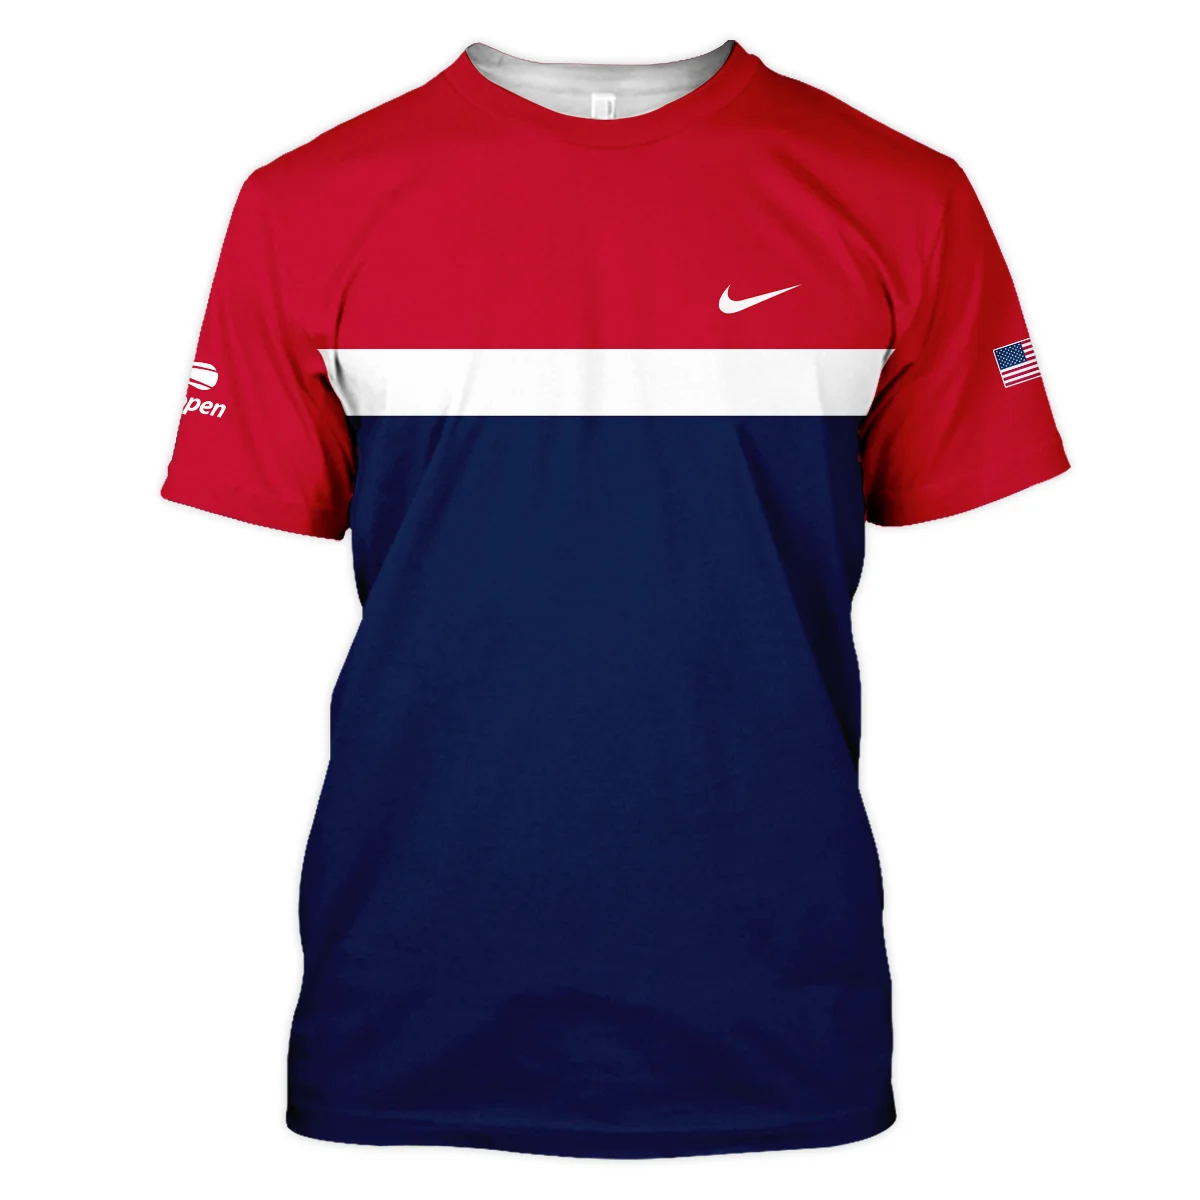 Nike Blue Red White Background US Open Tennis Champions Zipper Polo Shirt Style Classic Zipper Polo Shirt For Men